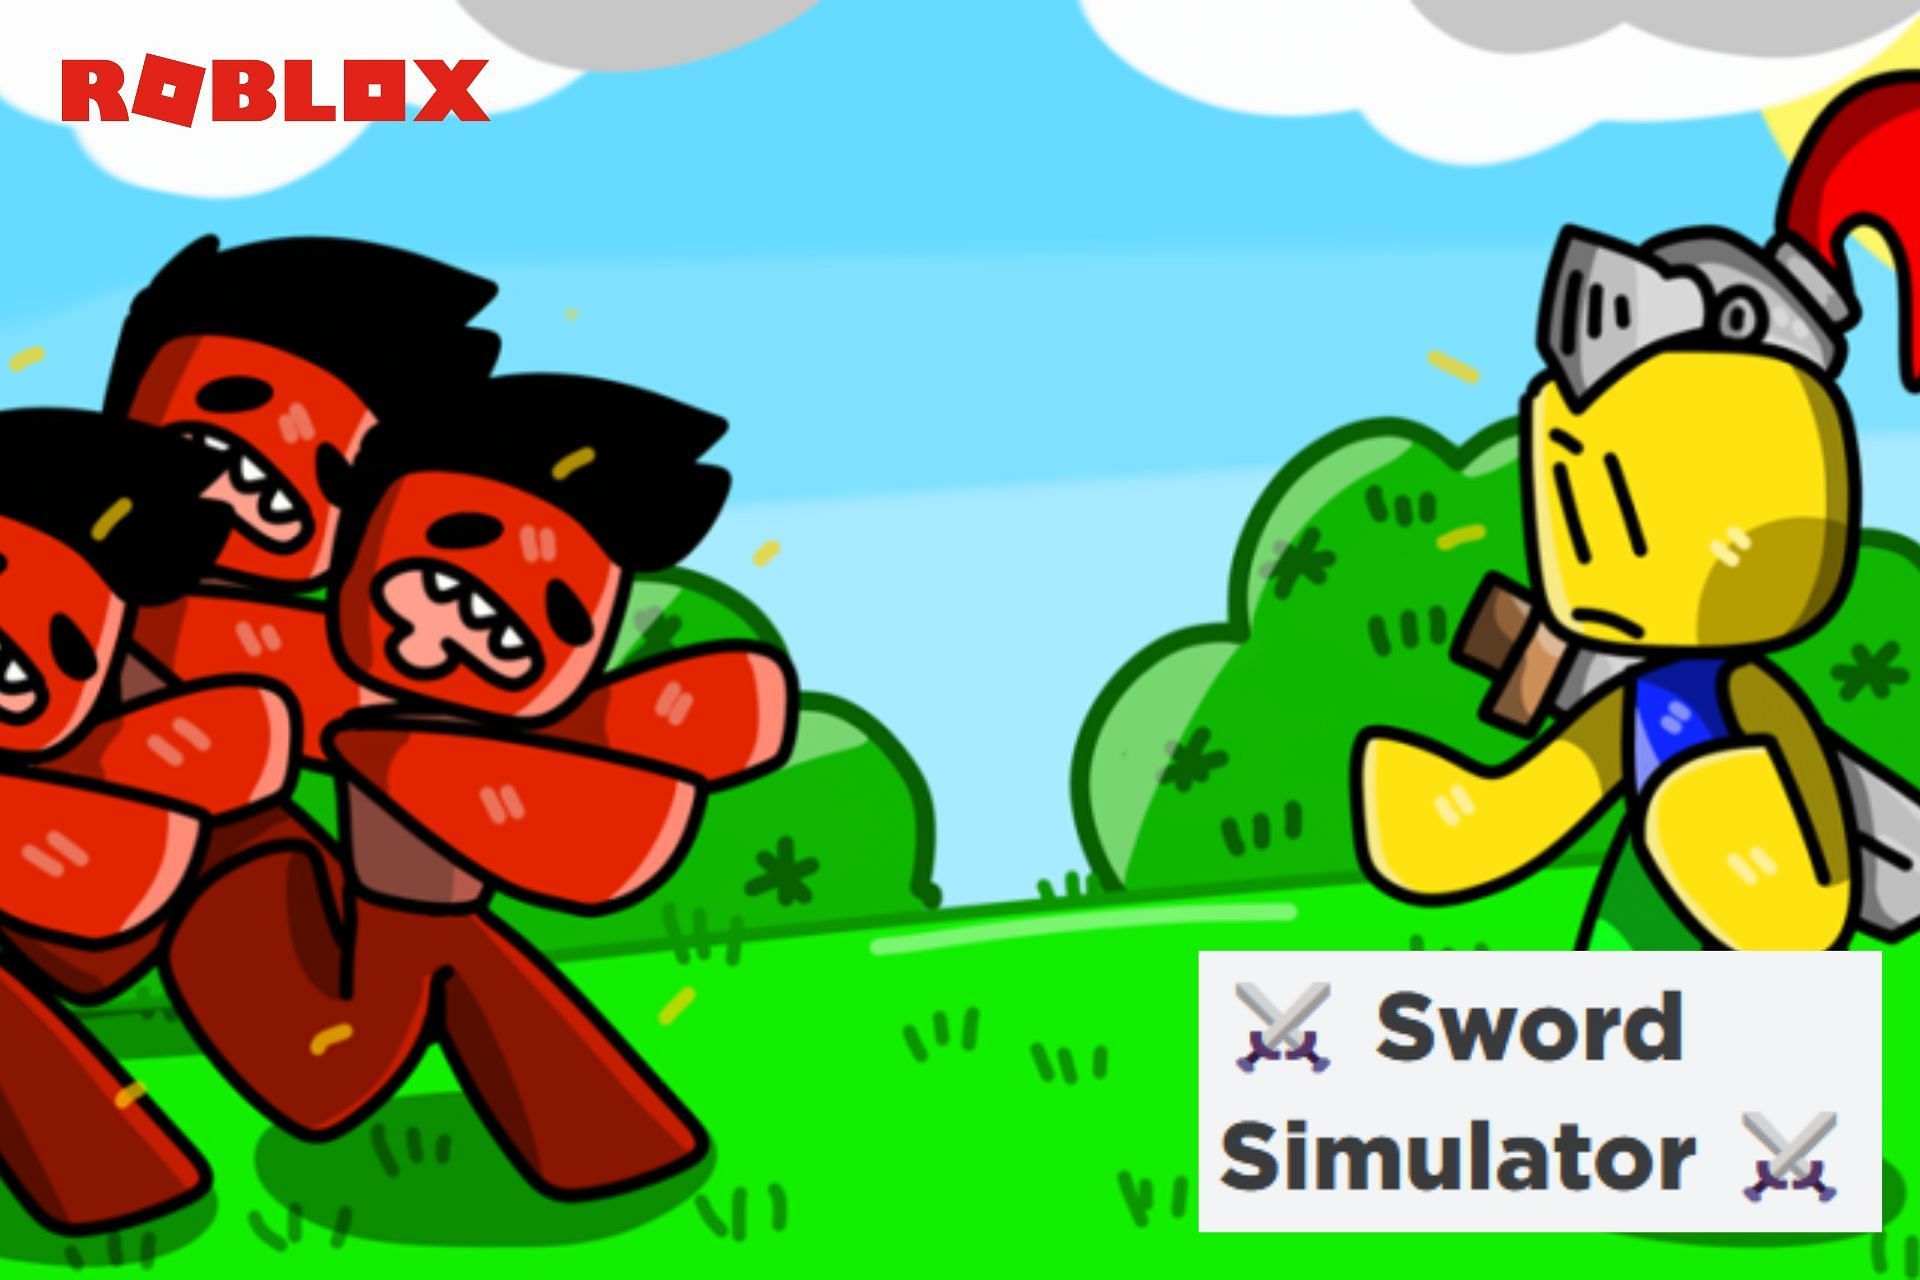 Weapon Fighting Simulator codes in Roblox: Free Boosts (July 2022)